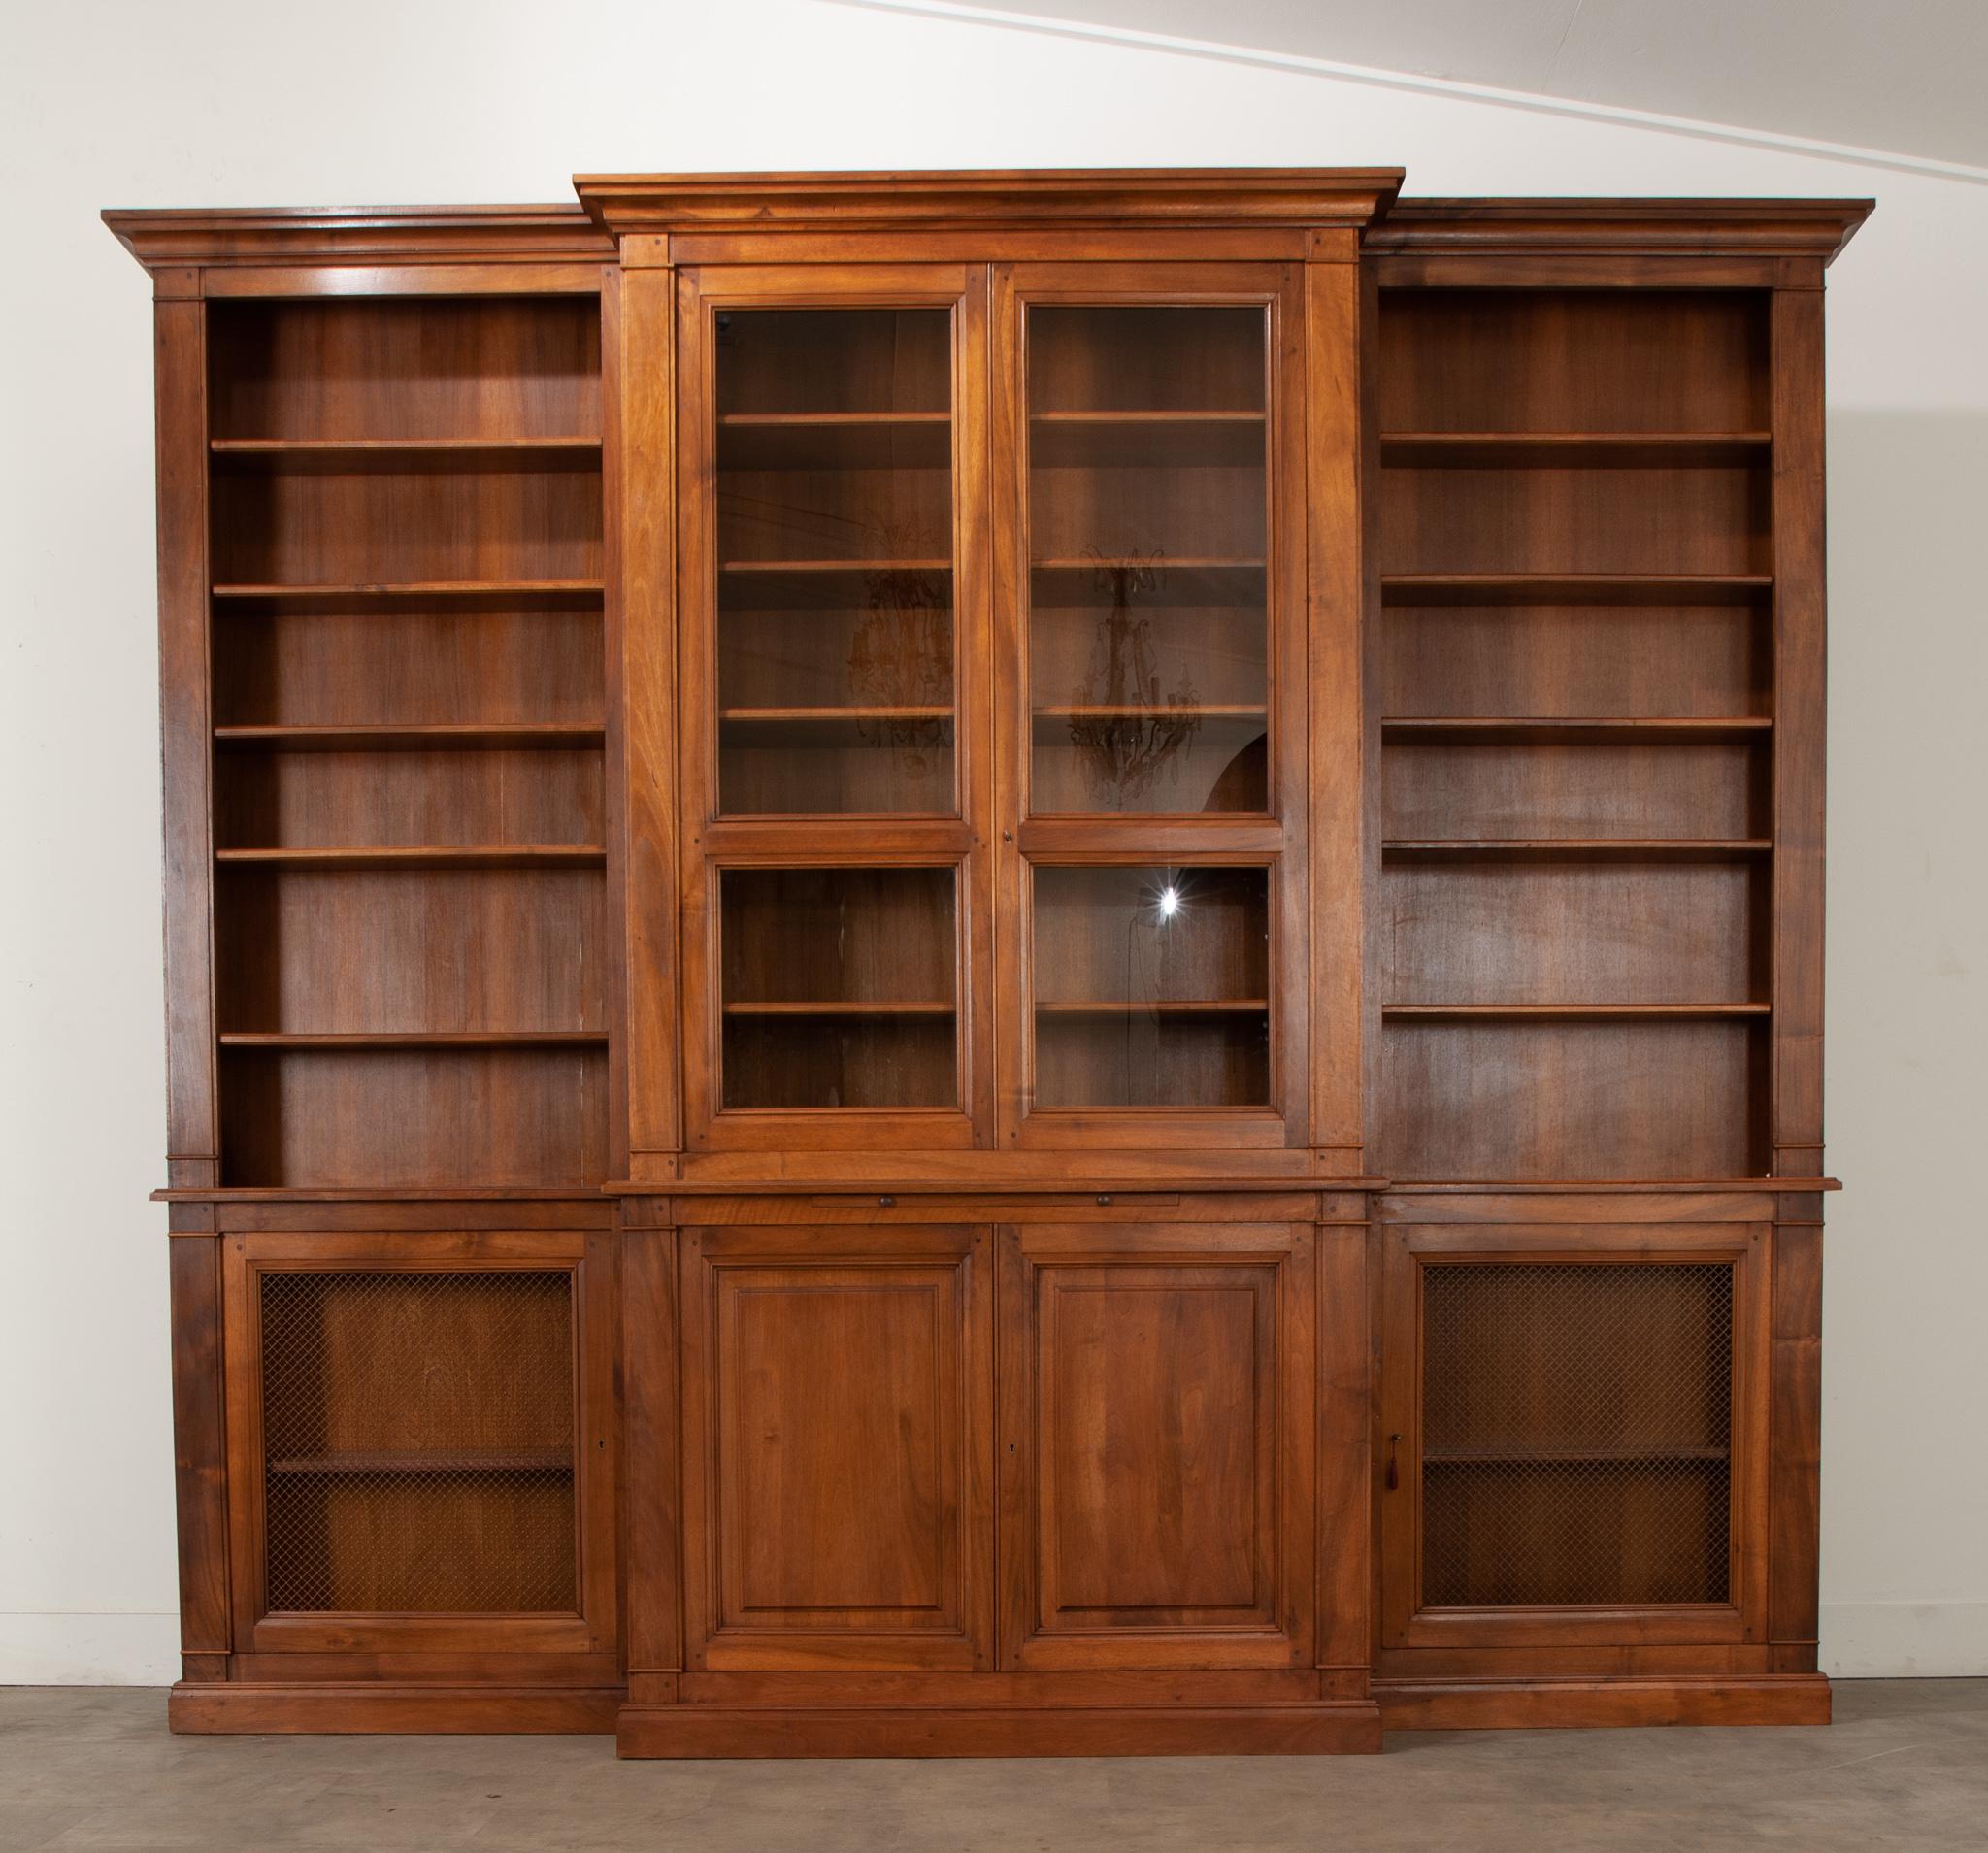 This classically designed breakfront bibliotheque was custom made with beautiful walnut veneer. The center of the bookcase has two glass paneled doors with five adjustable shelves measuring 12.5” deep, below are two pull out slides measuring 33 ½”